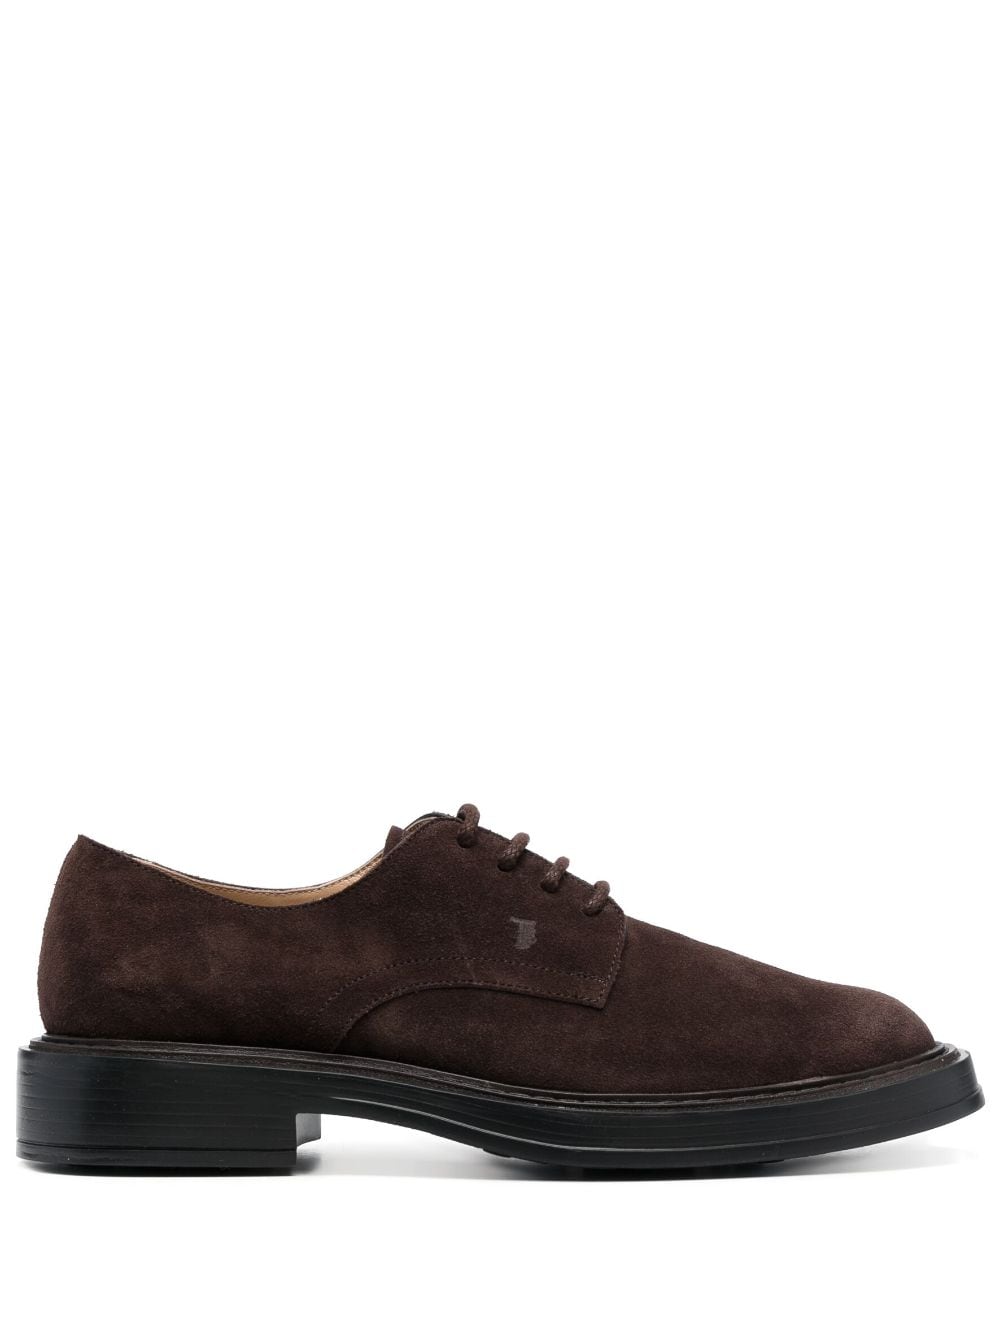 Image 1 of Tod's suede Derby shoes